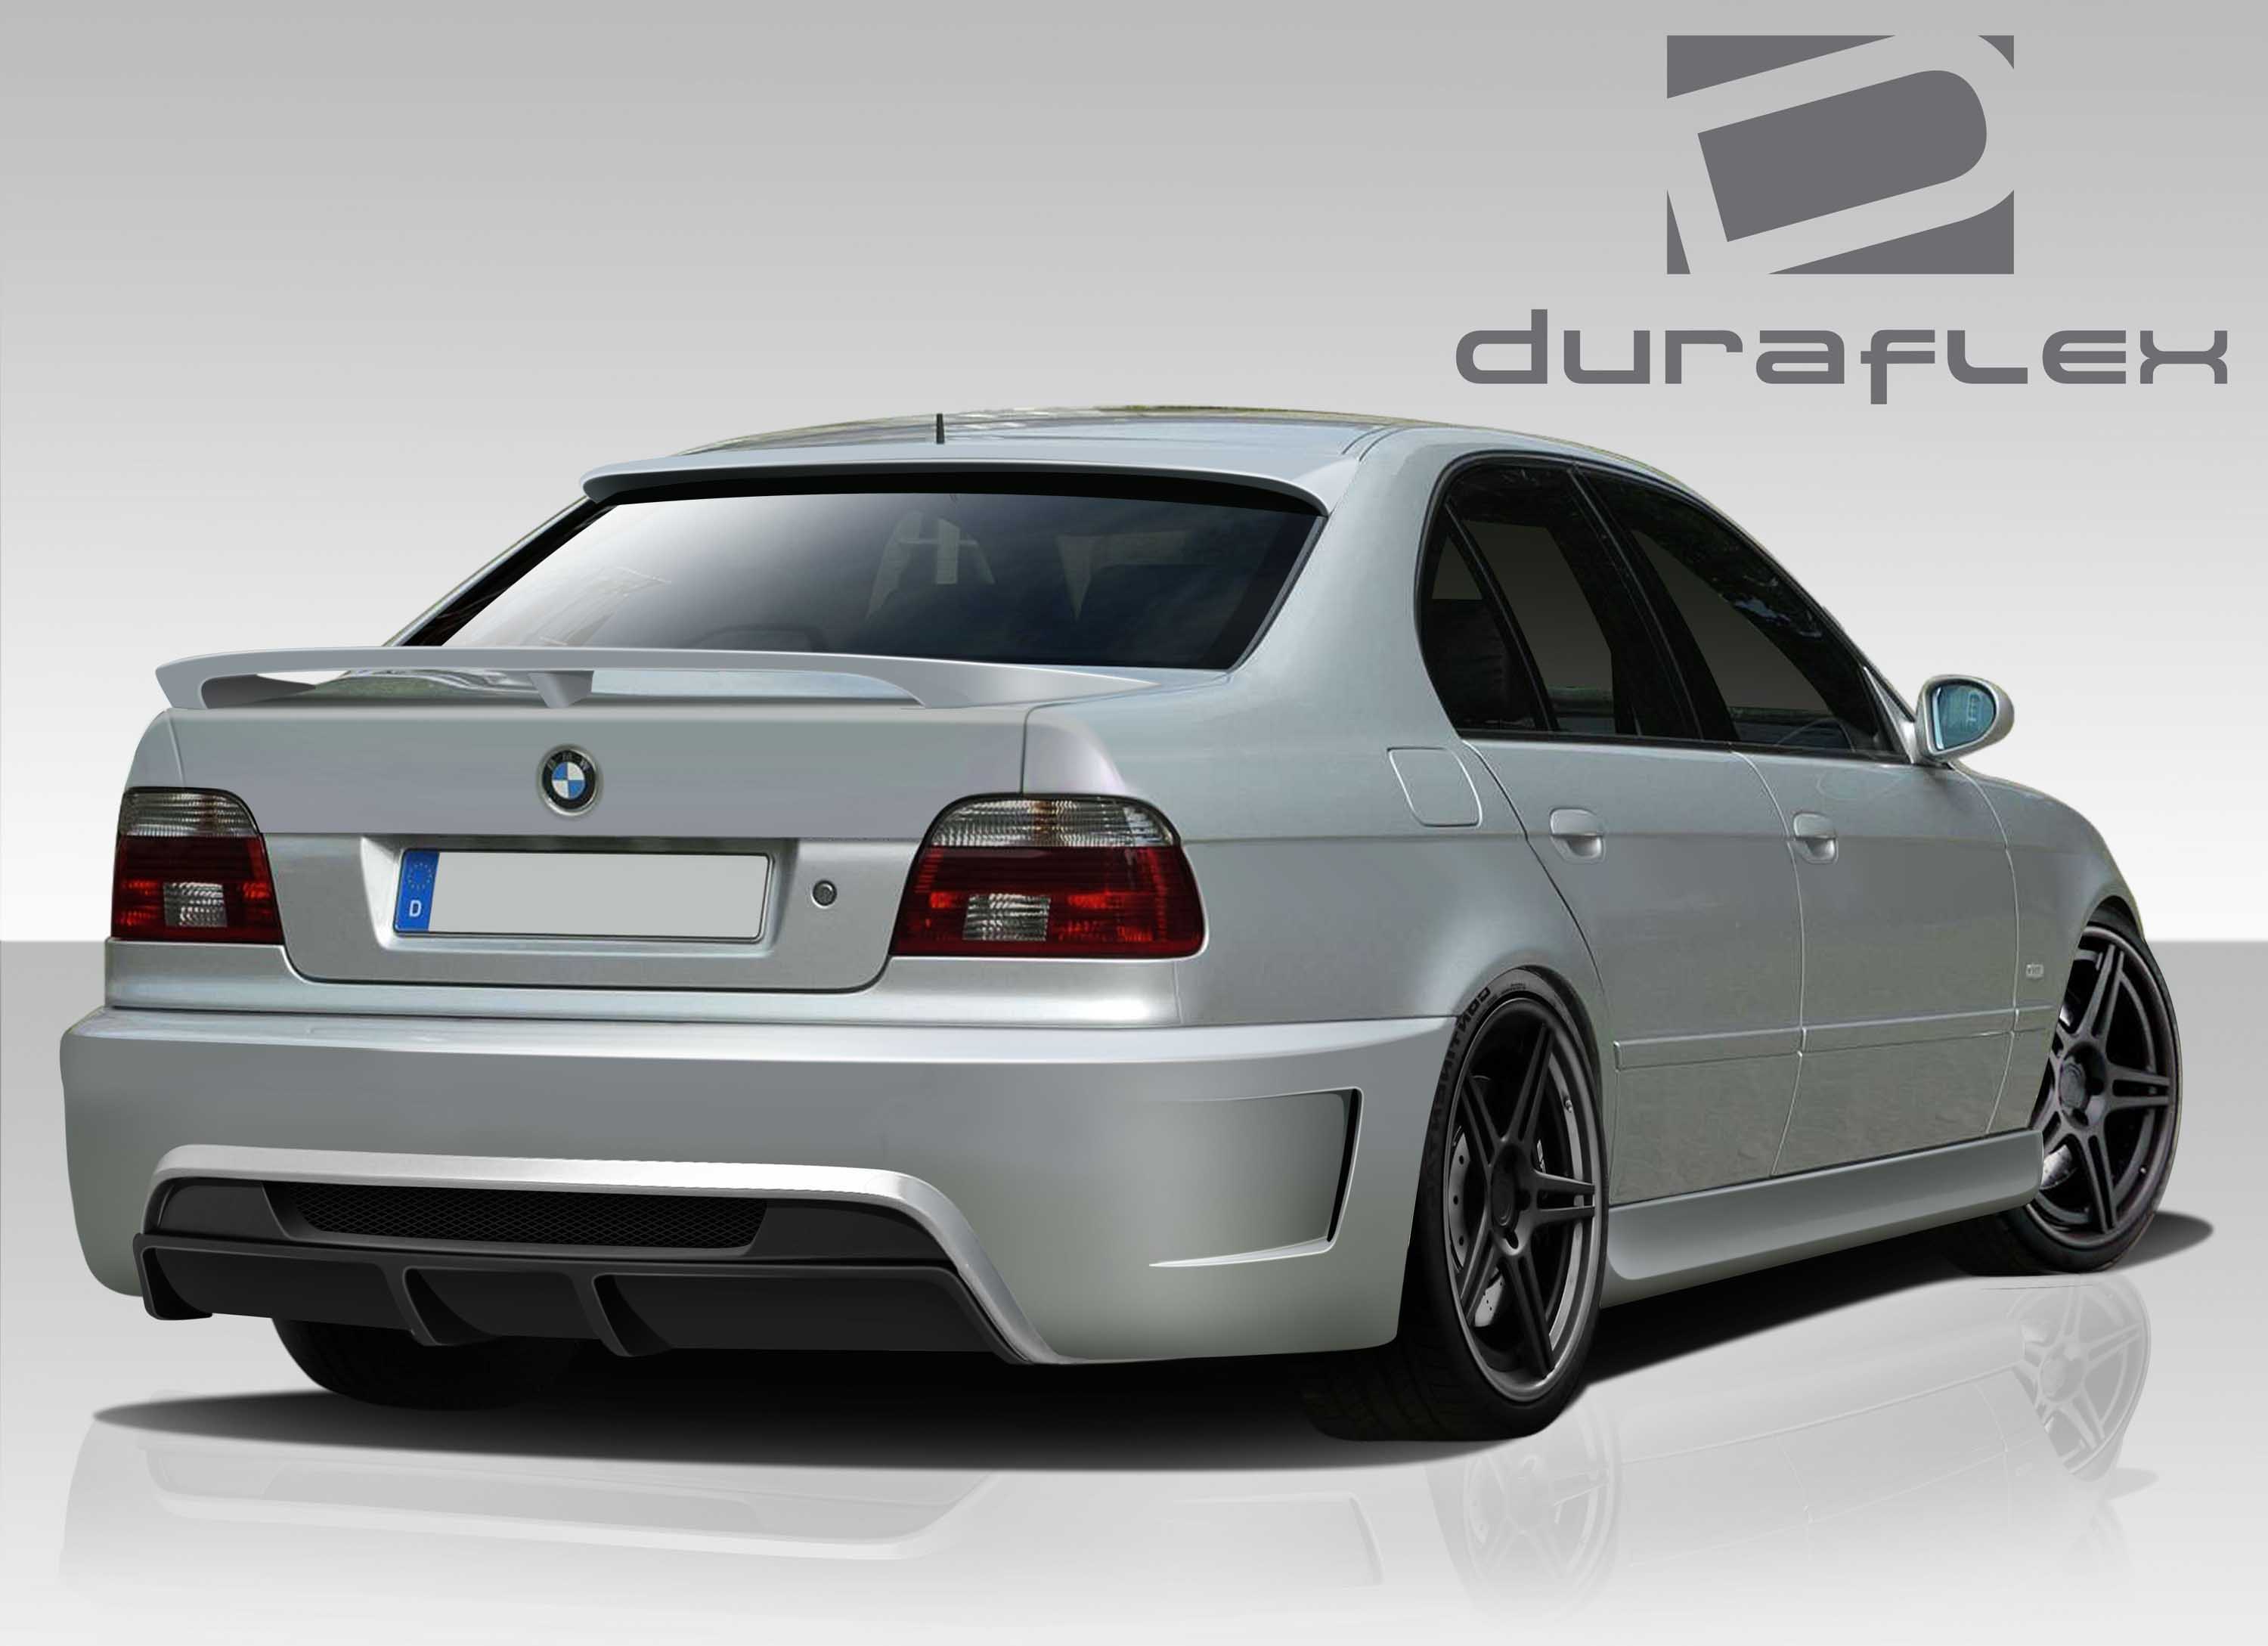 PAINTED Fit FOR BMW E39 5-SERIES 4DR REAR ROOF SPOILER 4DR 520i 525i 2003 #475